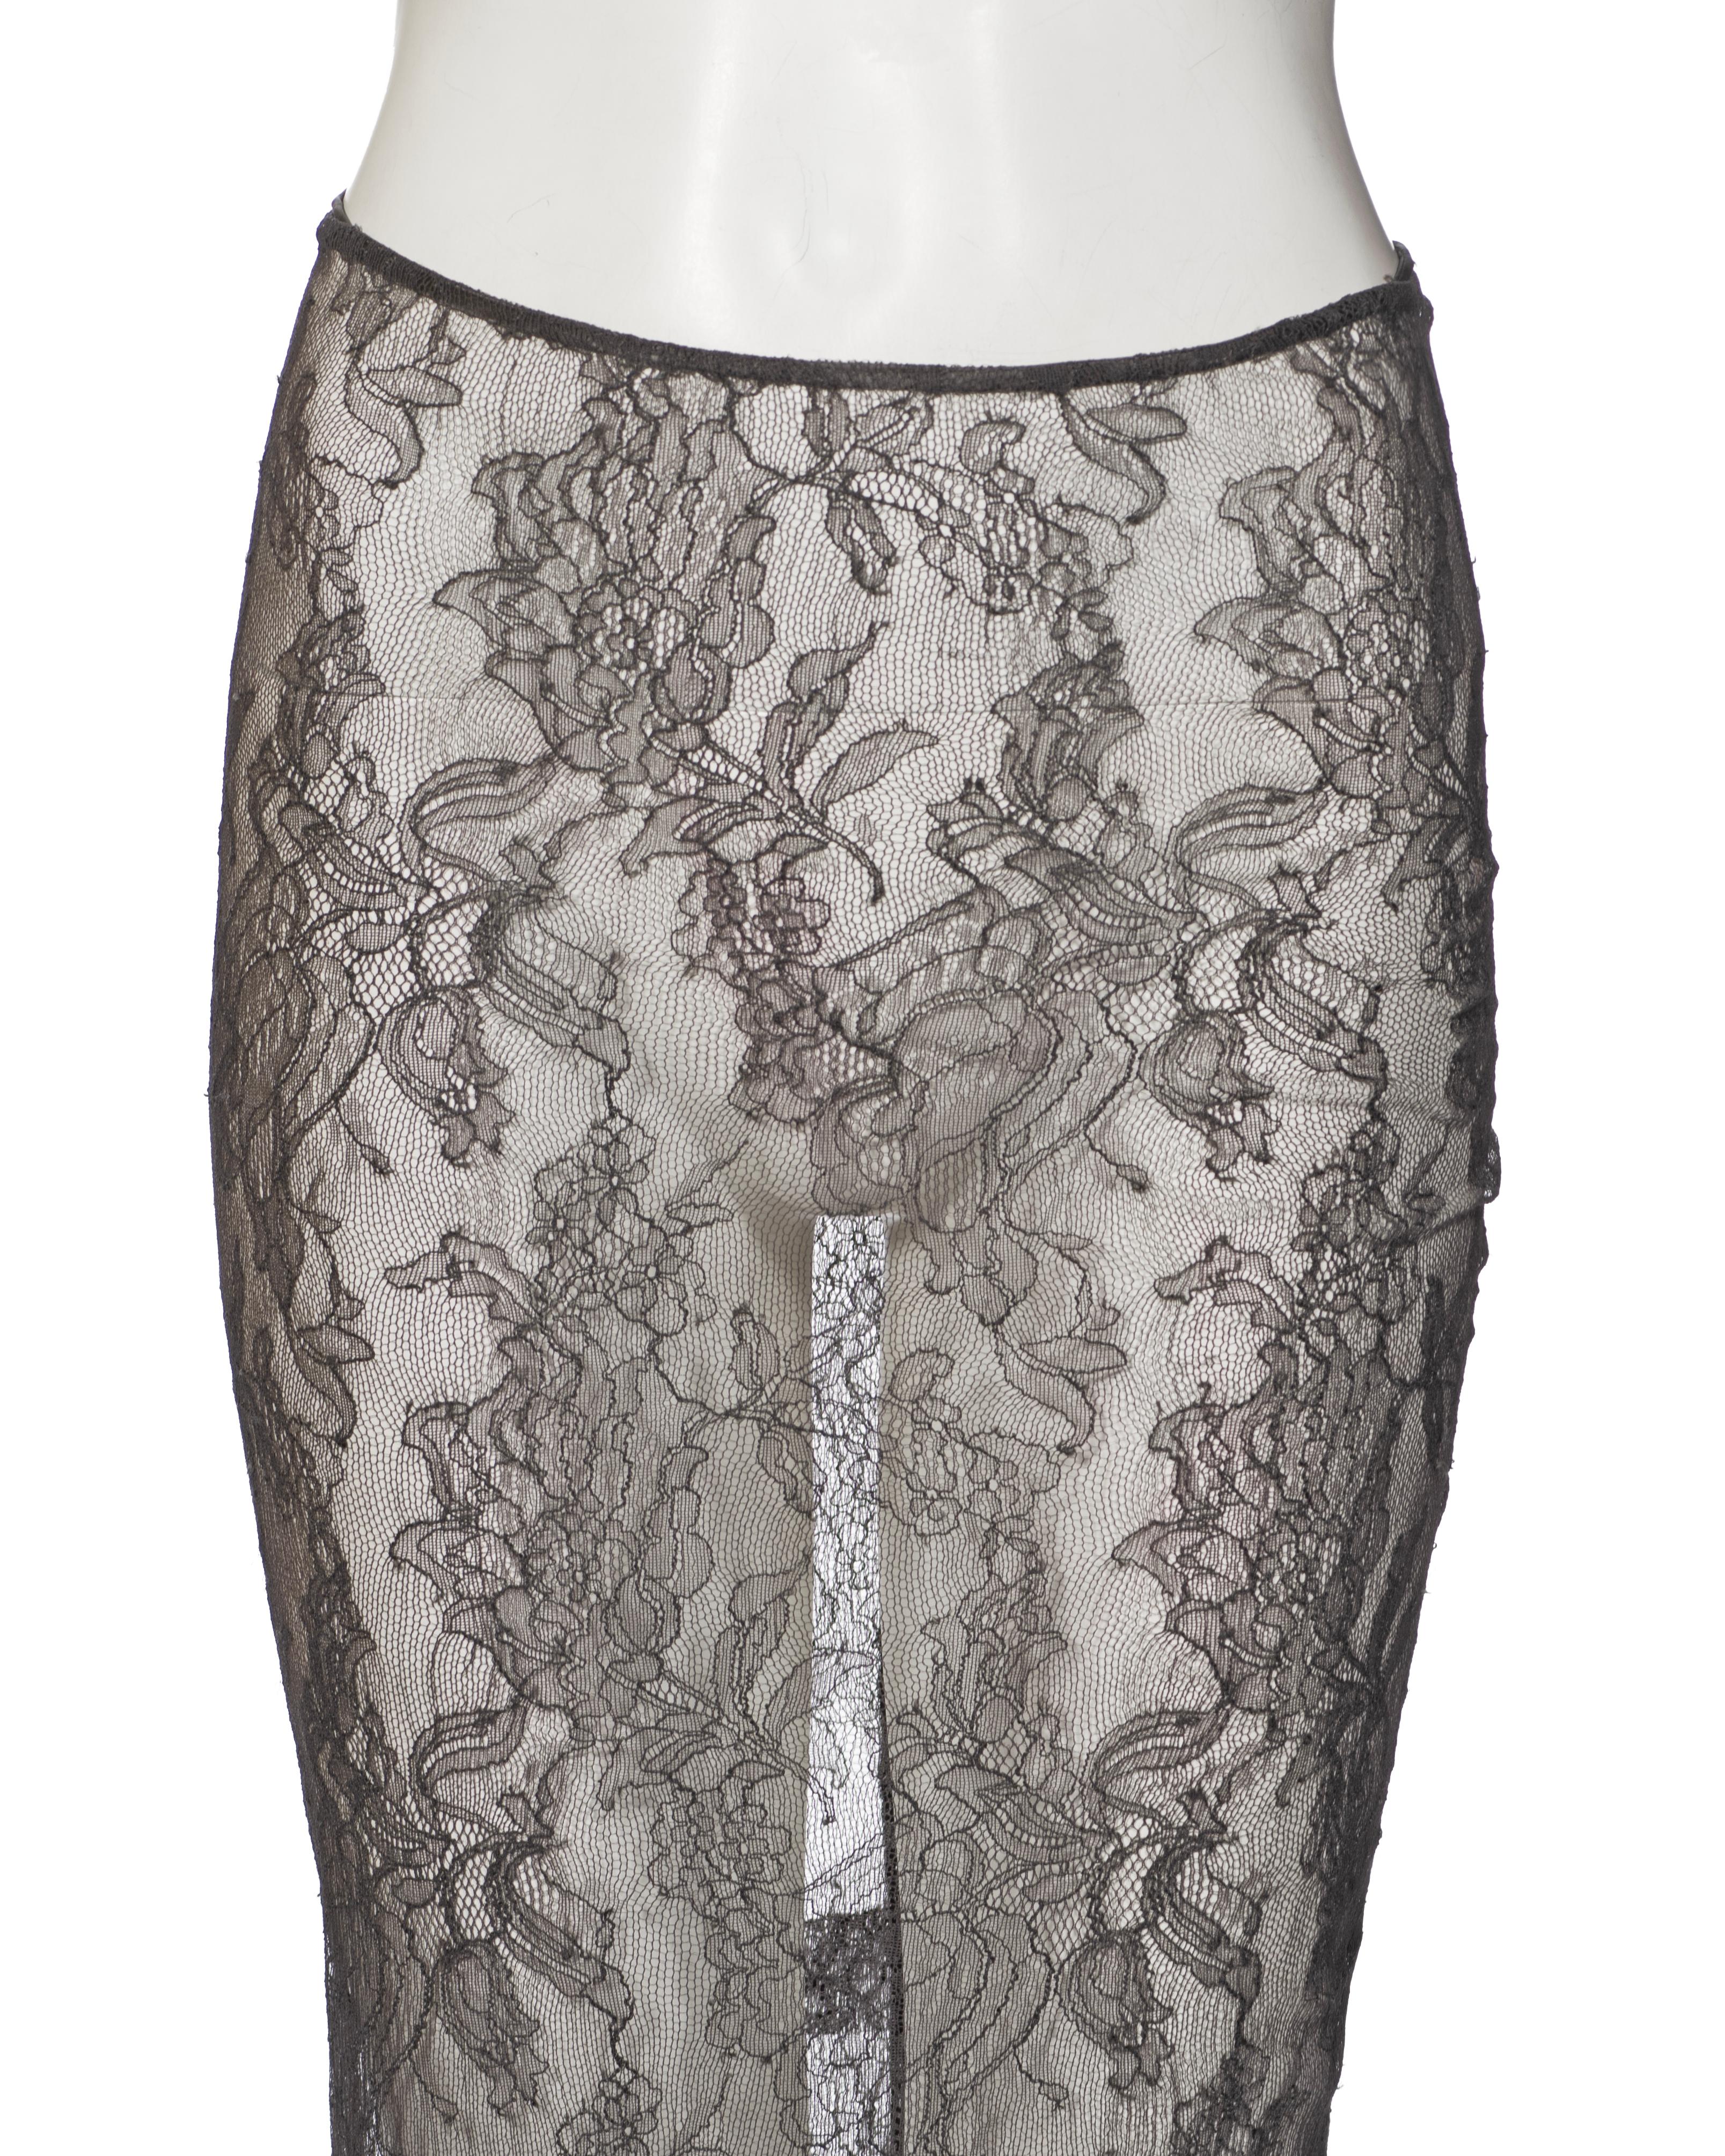 Women's Dolce & Gabbana Grey Floral Lace Skirt with Train, ss 1999